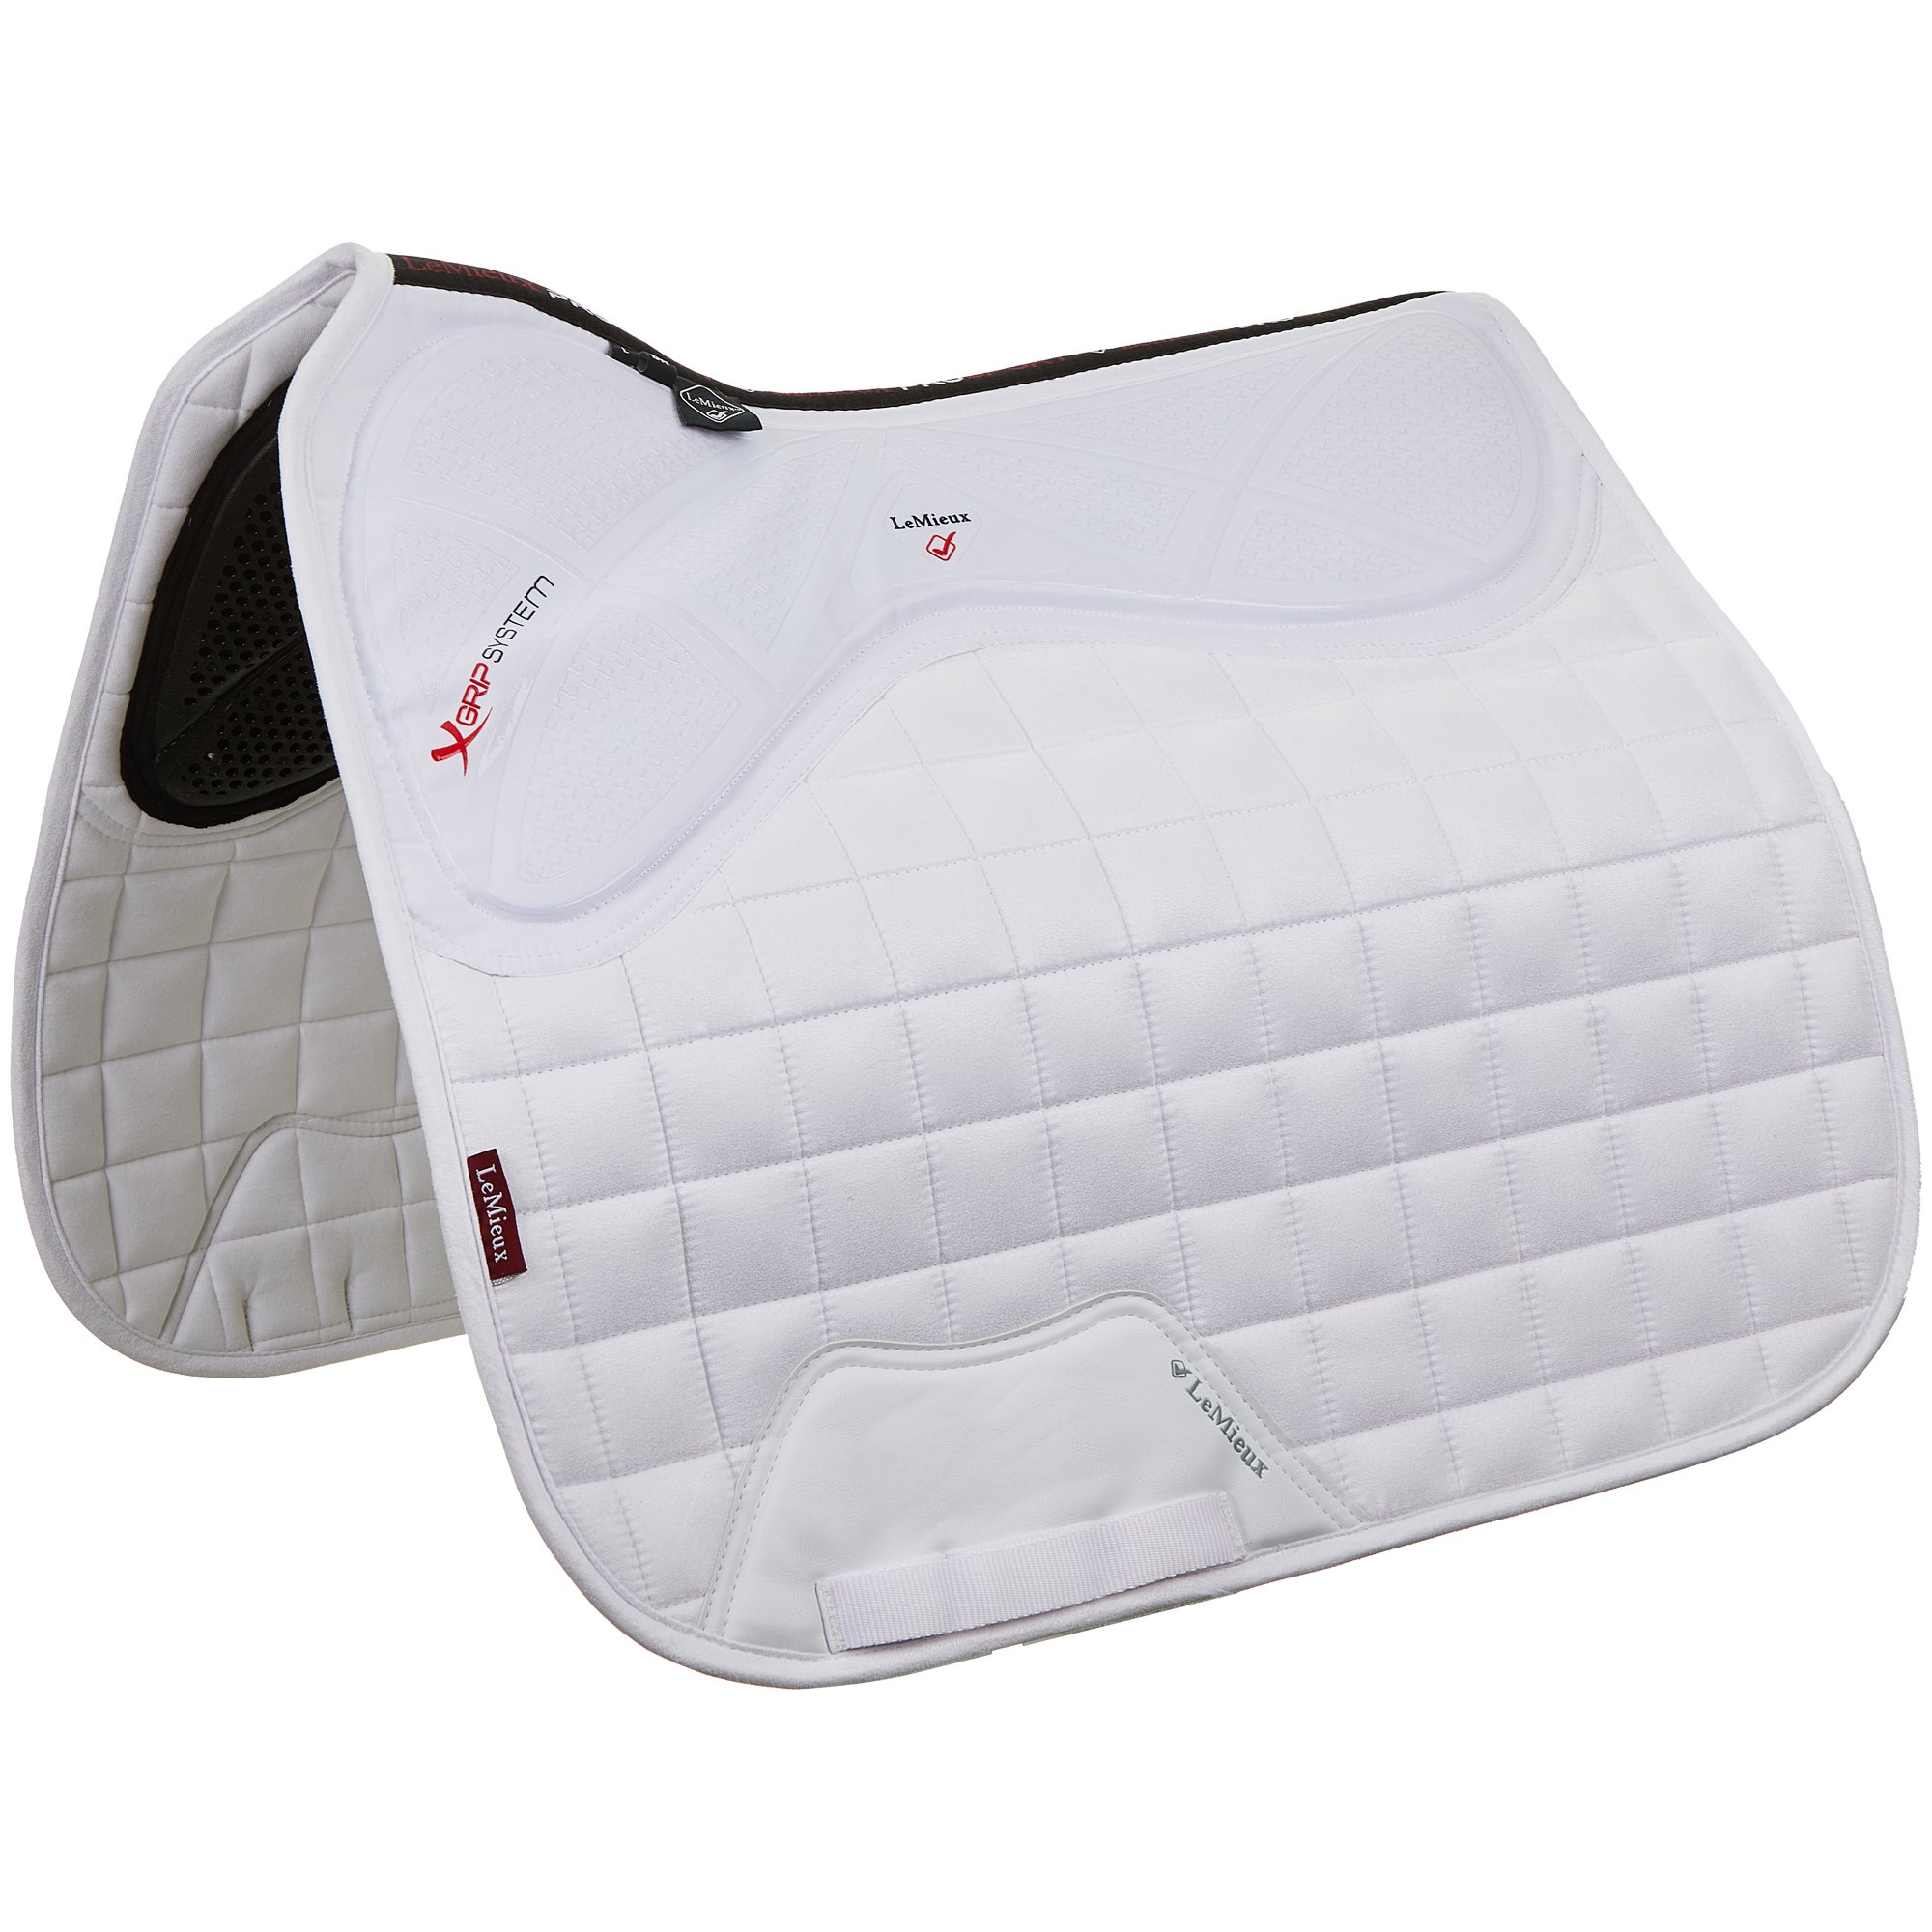 NON Slip twin sided silicone Comfort spine clearance saddle pad numnah 